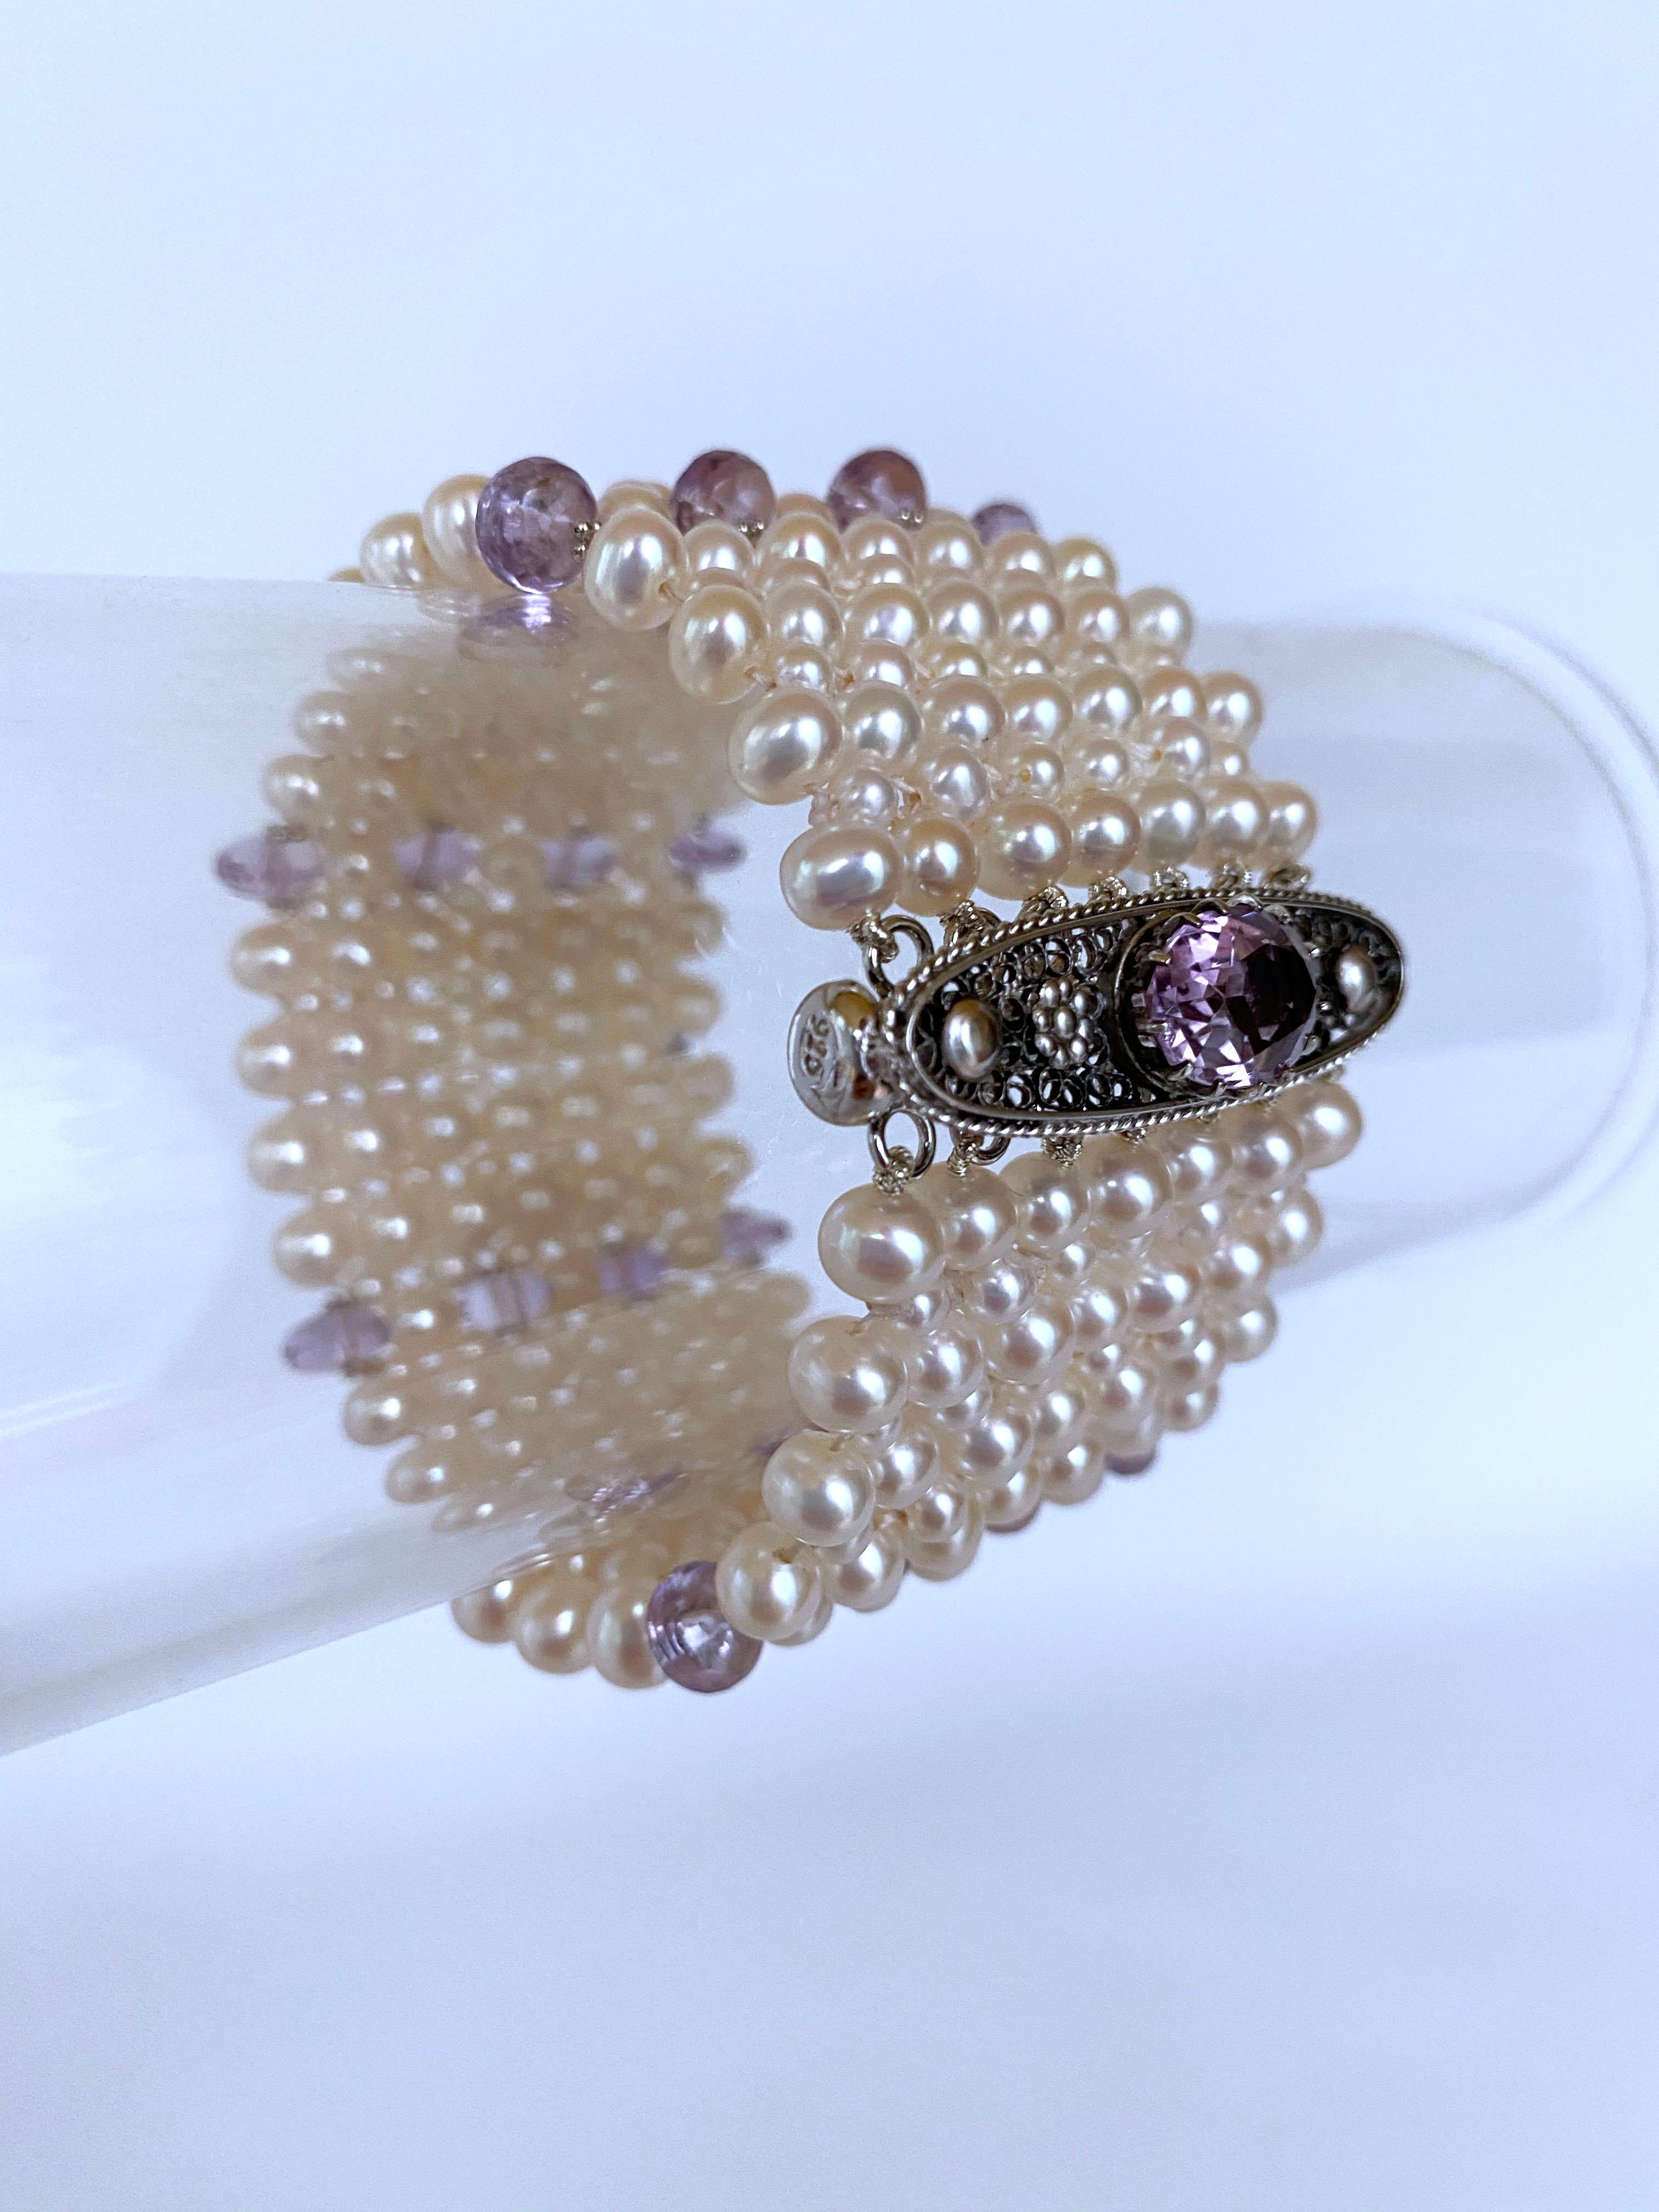 Gorgeous piece from Marina J. This intricately hand woven bracelet is made of high luster cream Pearls which display a wild iridescence of soft color. The multi sized pearls (2.5mm and 4mm)  are woven into a lace like pattern and complimented by